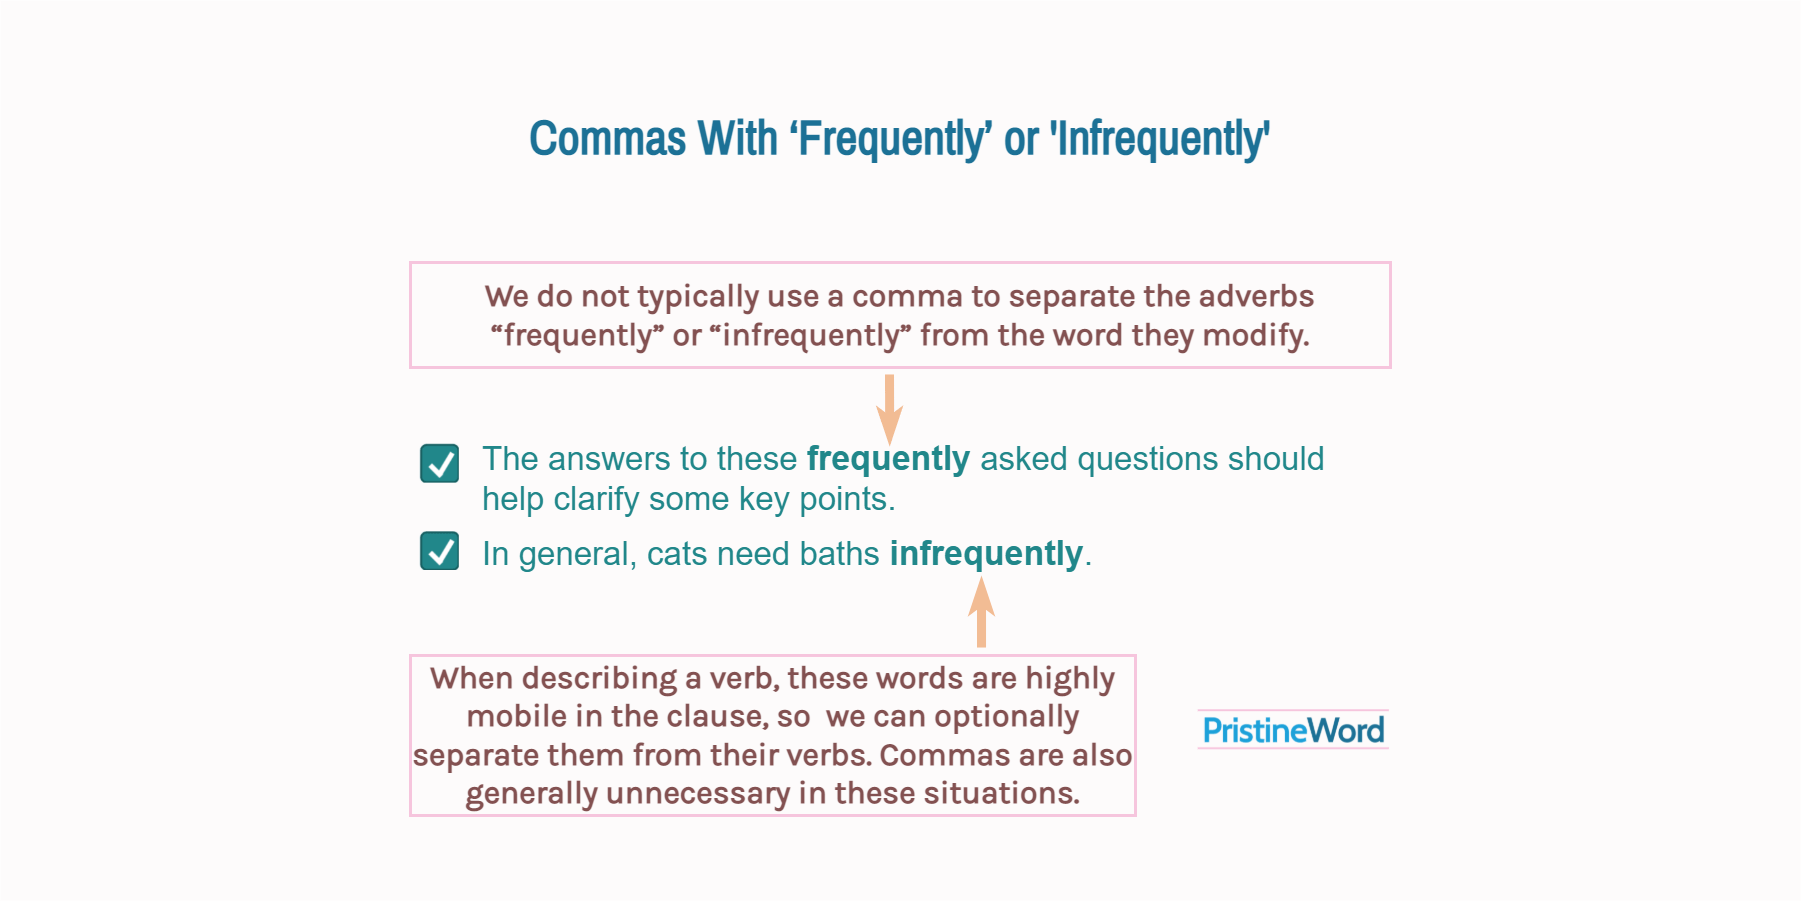 Commas With 'Frequently' and 'Infrequently'